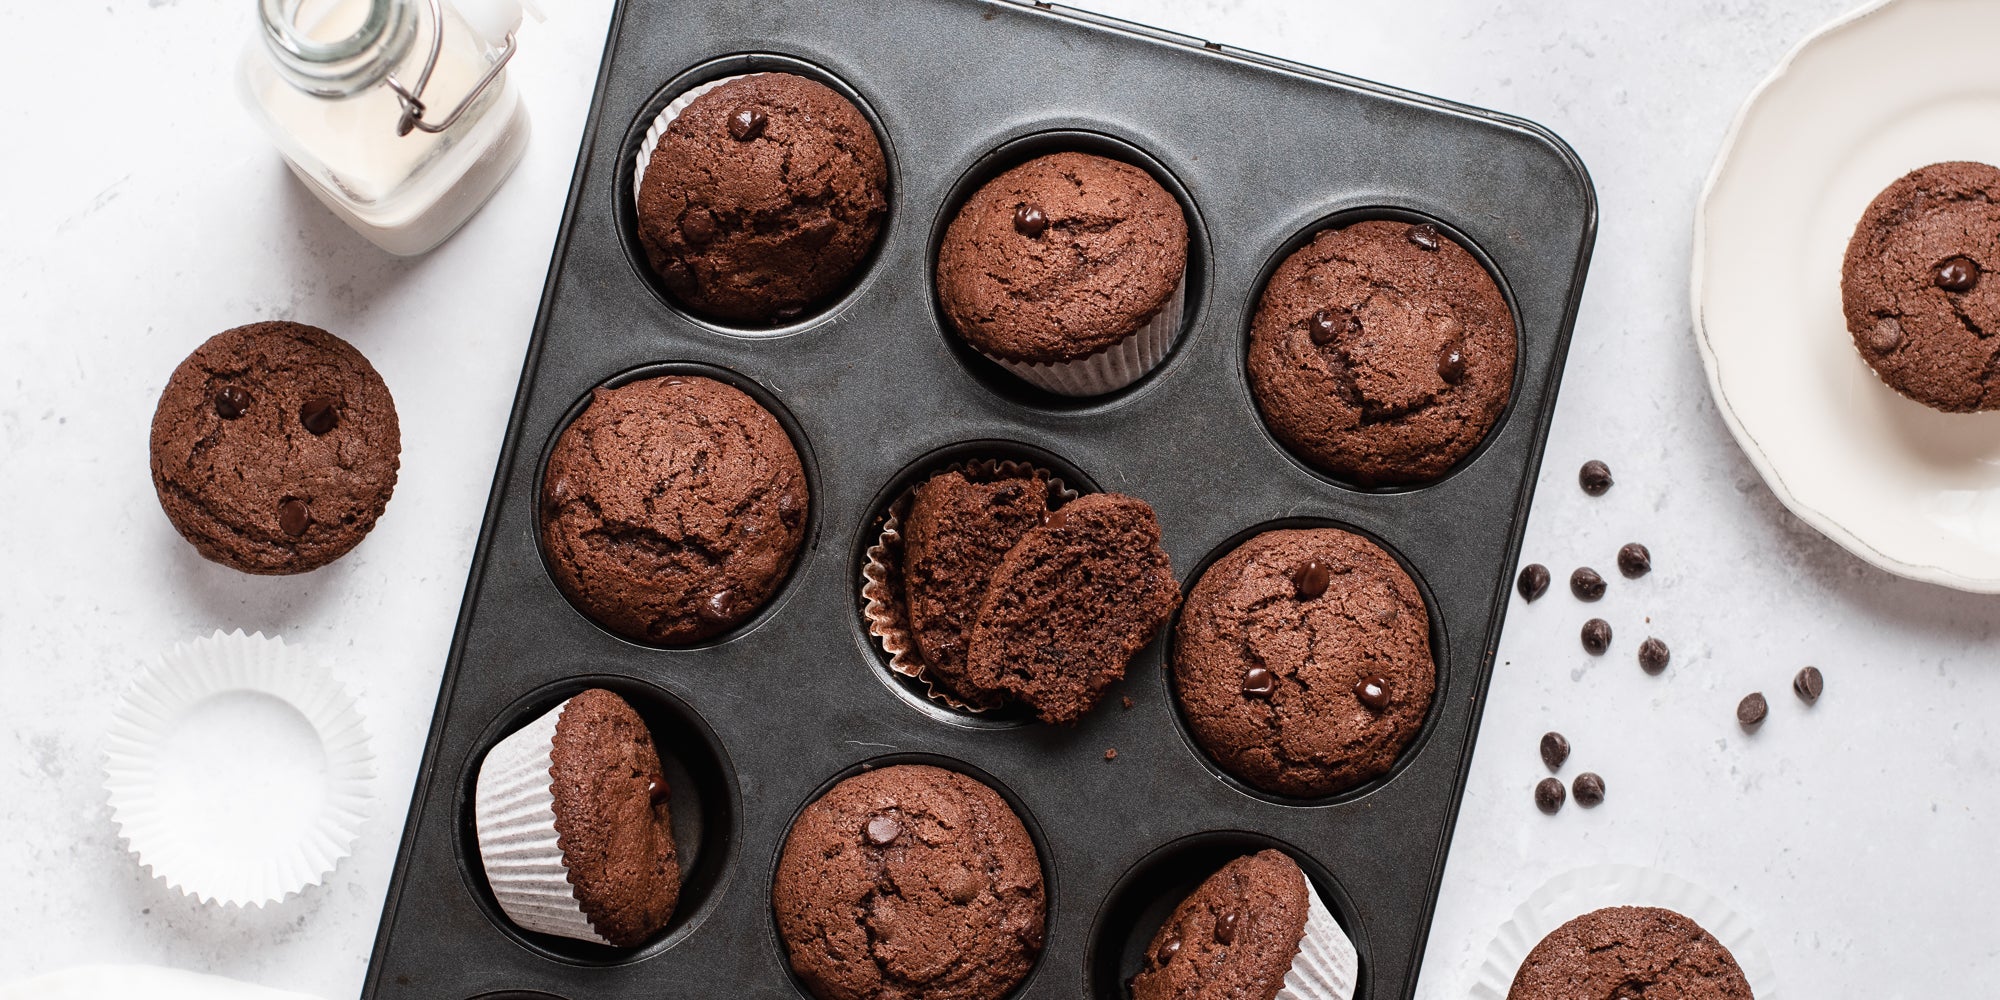 Gluten Free Chocolate Muffins in a muffin tray with chocolate chips and a glass bottle of milk